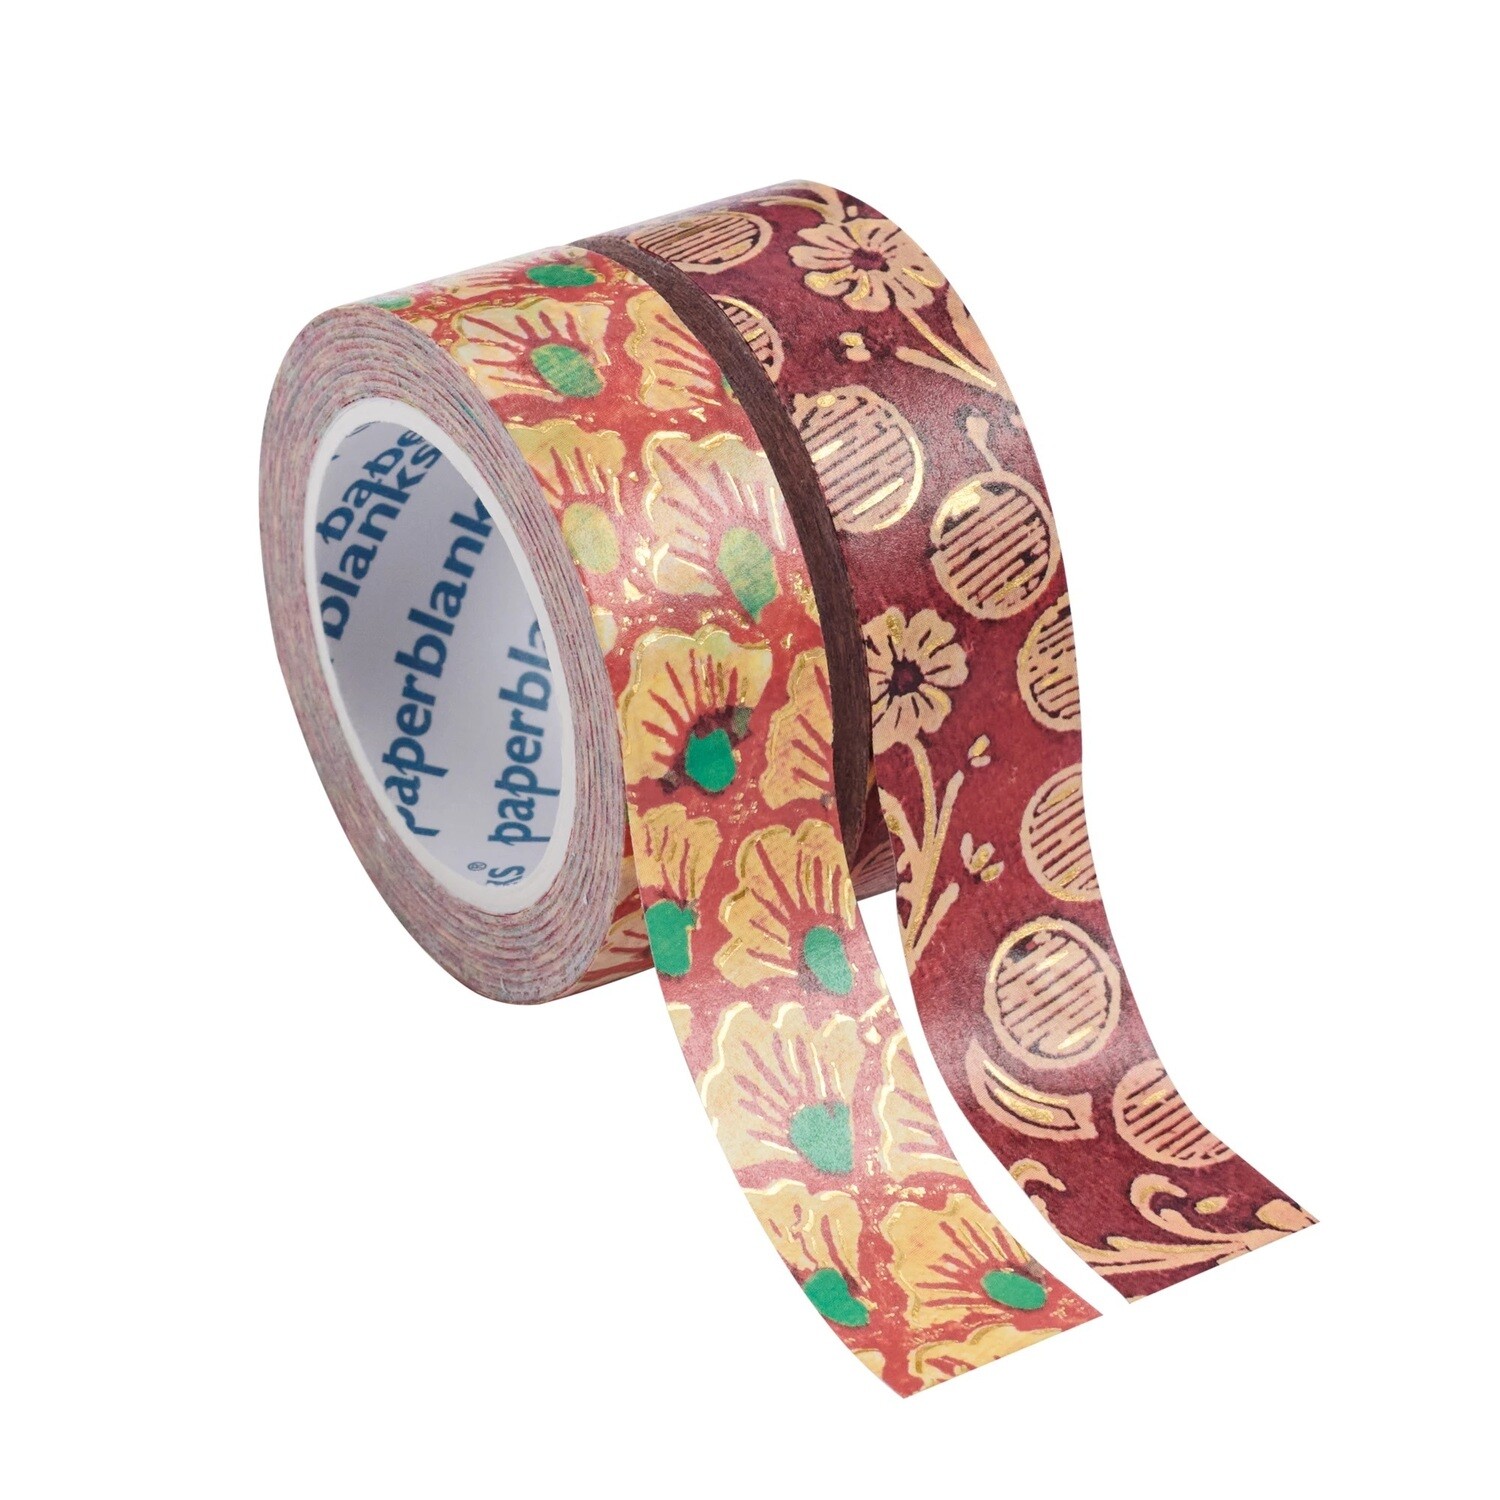 Washi Tape, The Waves Volume 3 and 4 2 Pack, 1/2" x 32.75'